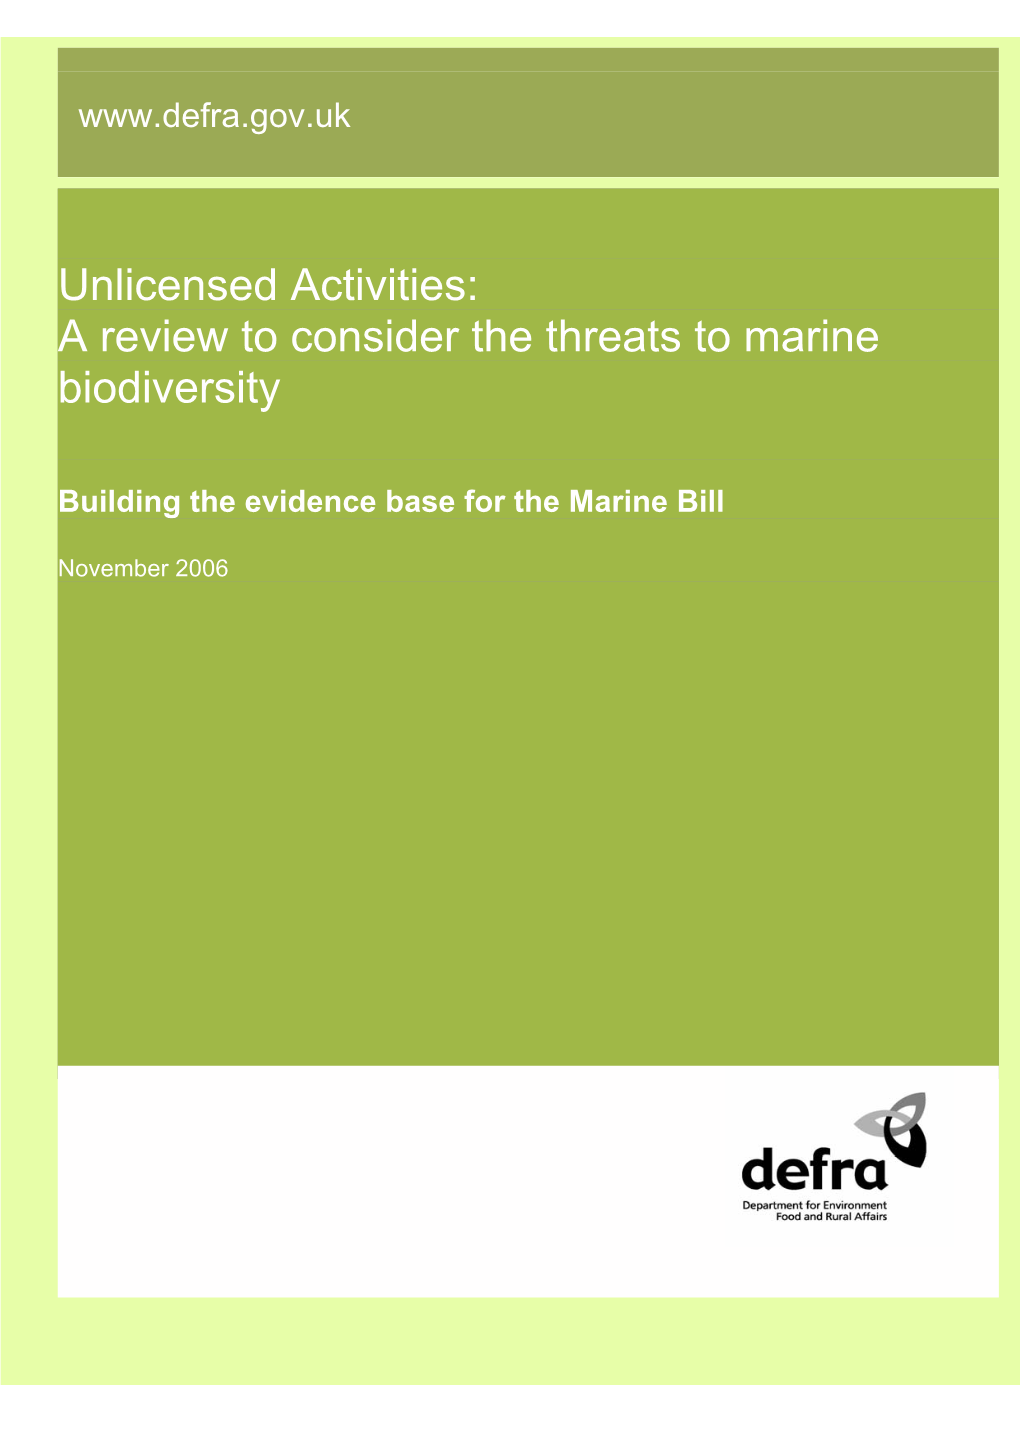 A Review to Consider the Threats to Marine Biodiversity